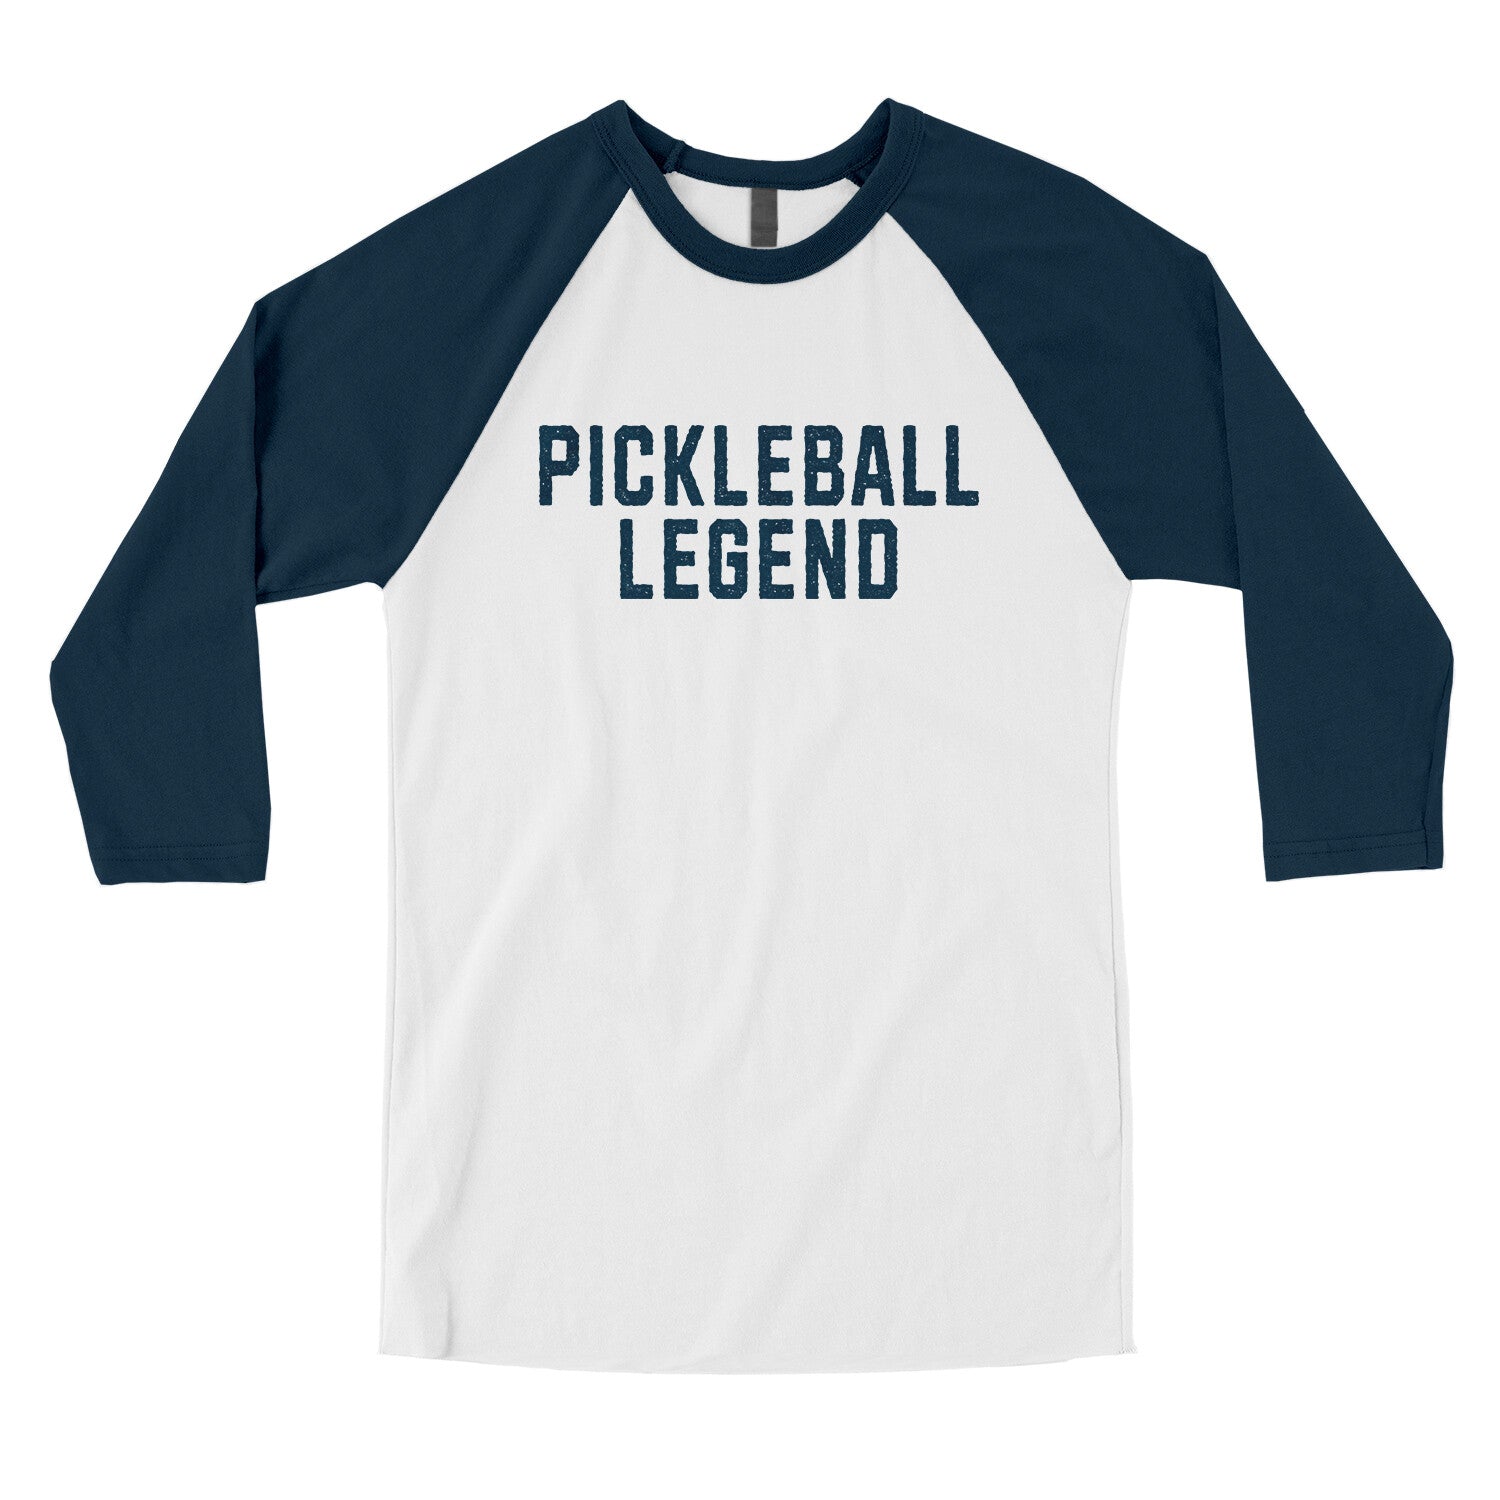 Pickleball Legend in White with Navy Color